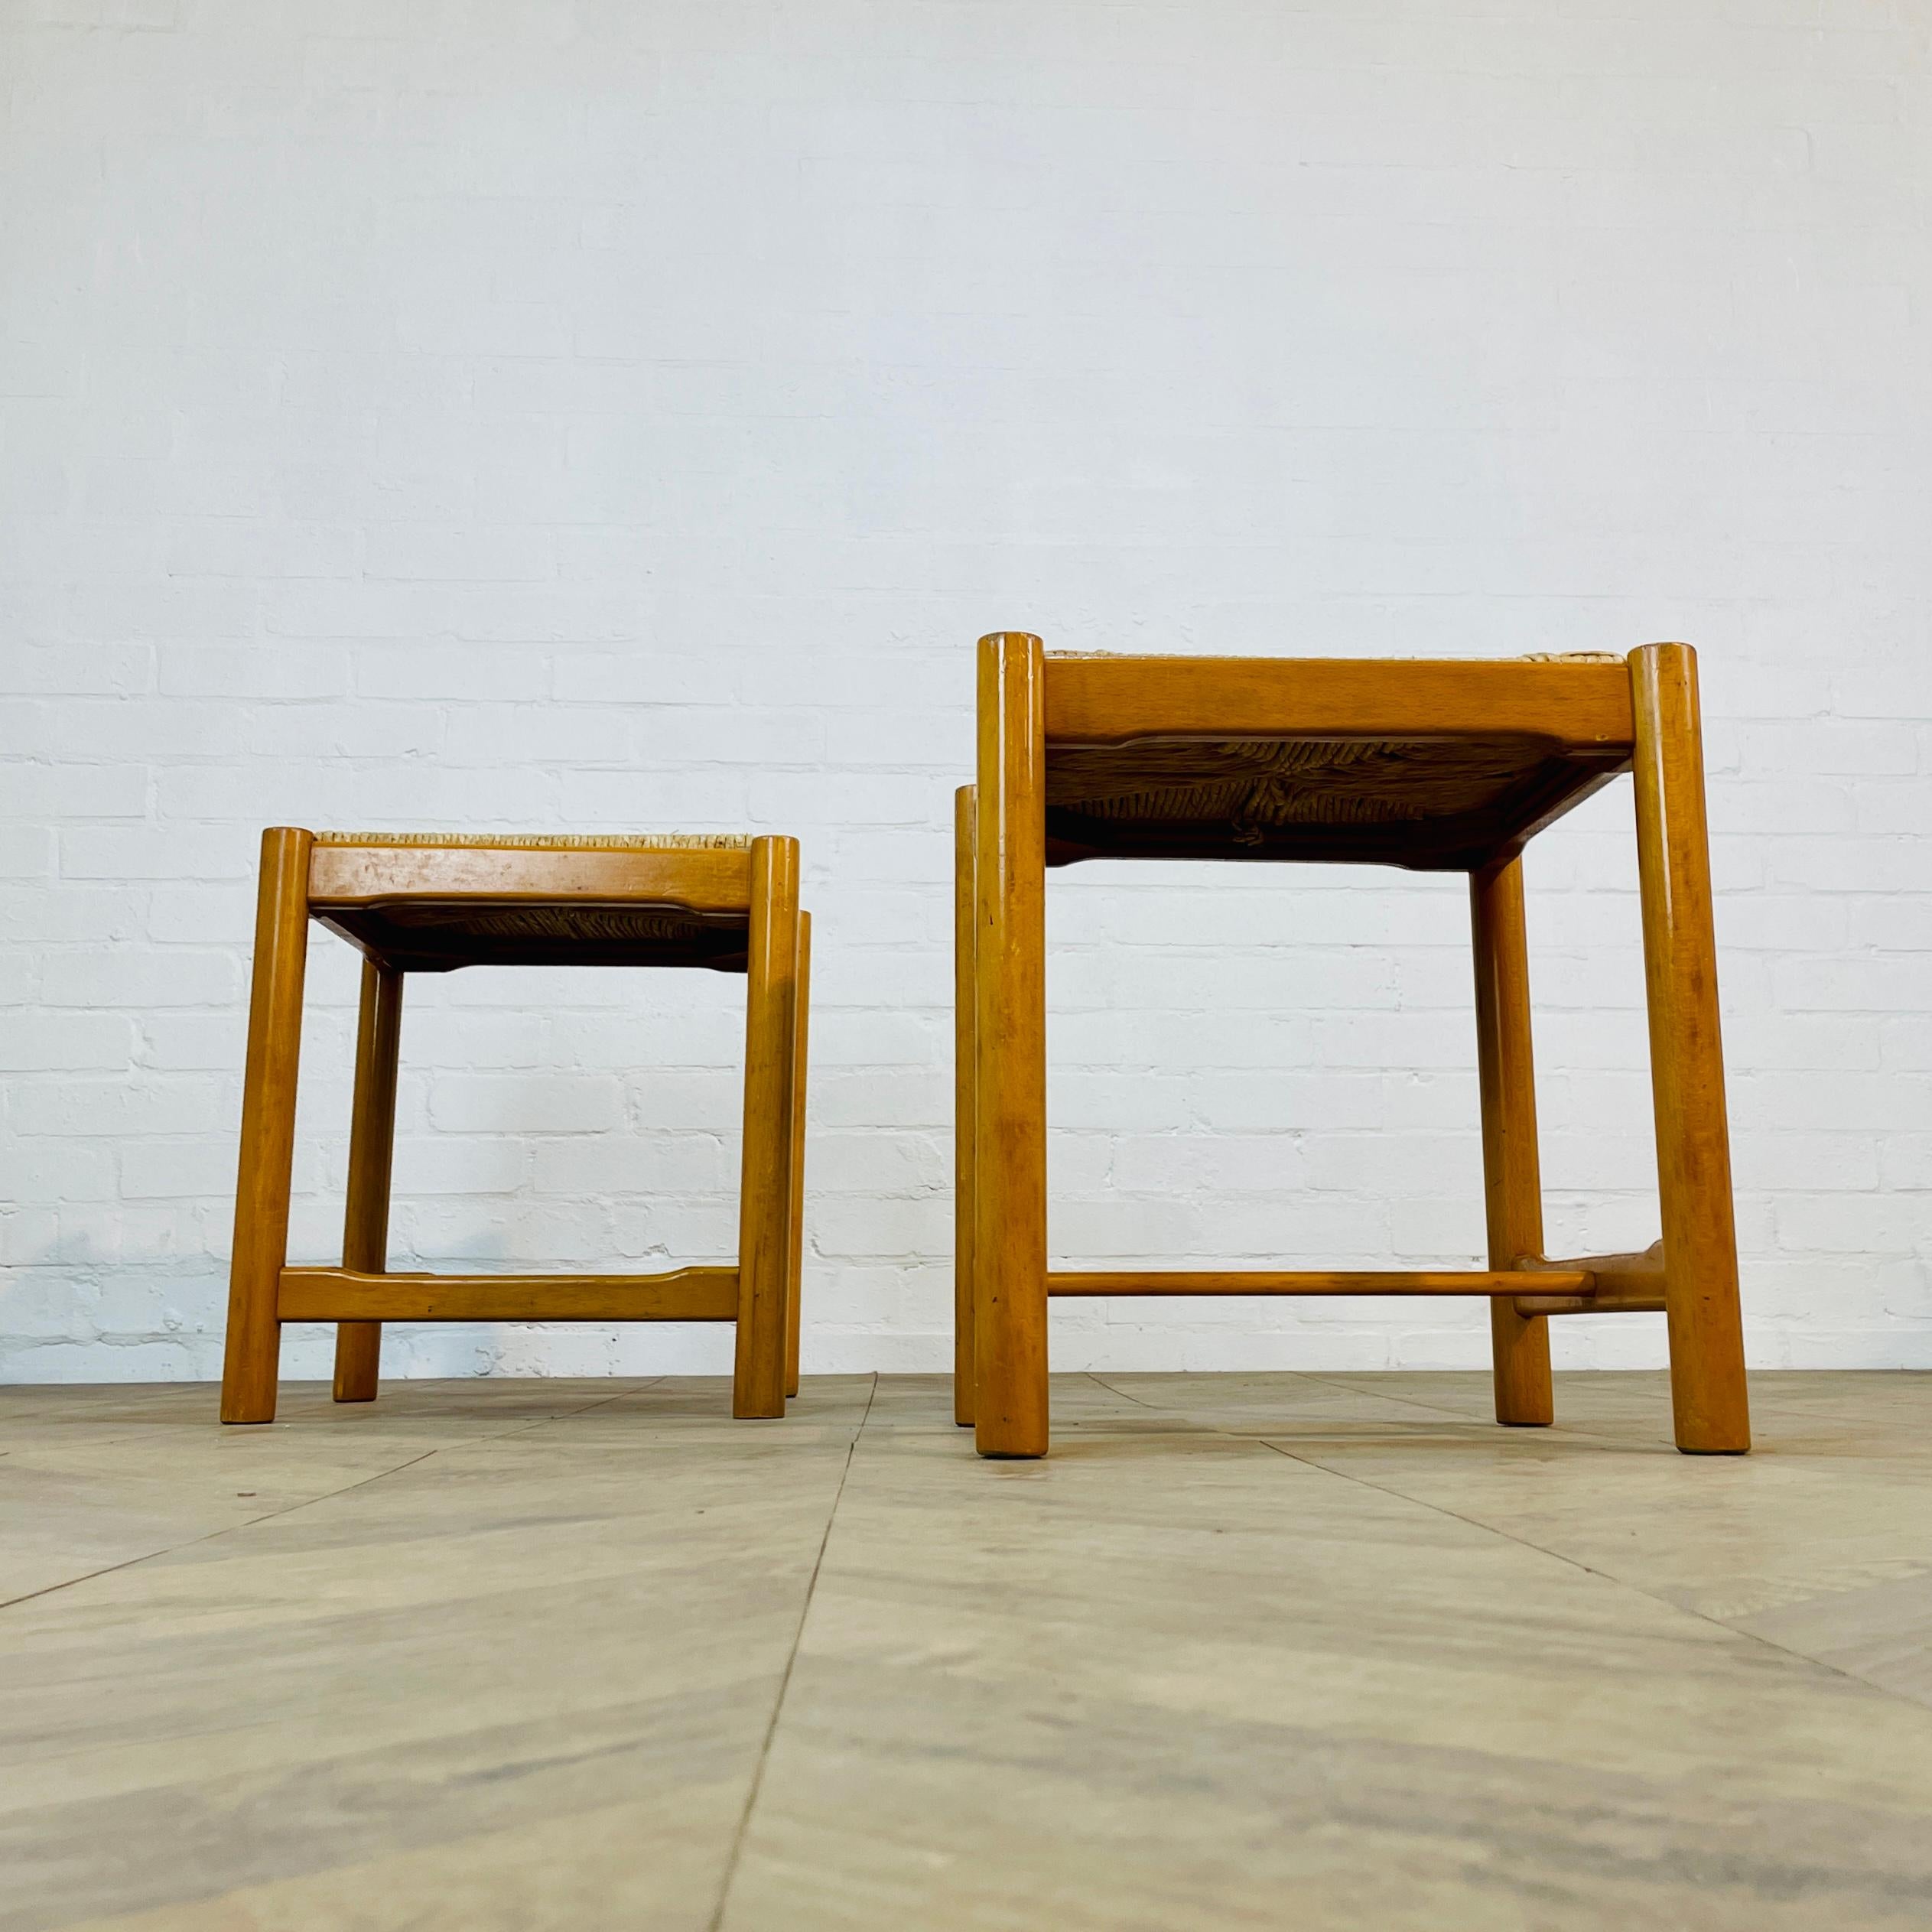 Vintage Mid Century Italian Stools, After Vico Magistretti, Set of 2, circa 1970 For Sale 1